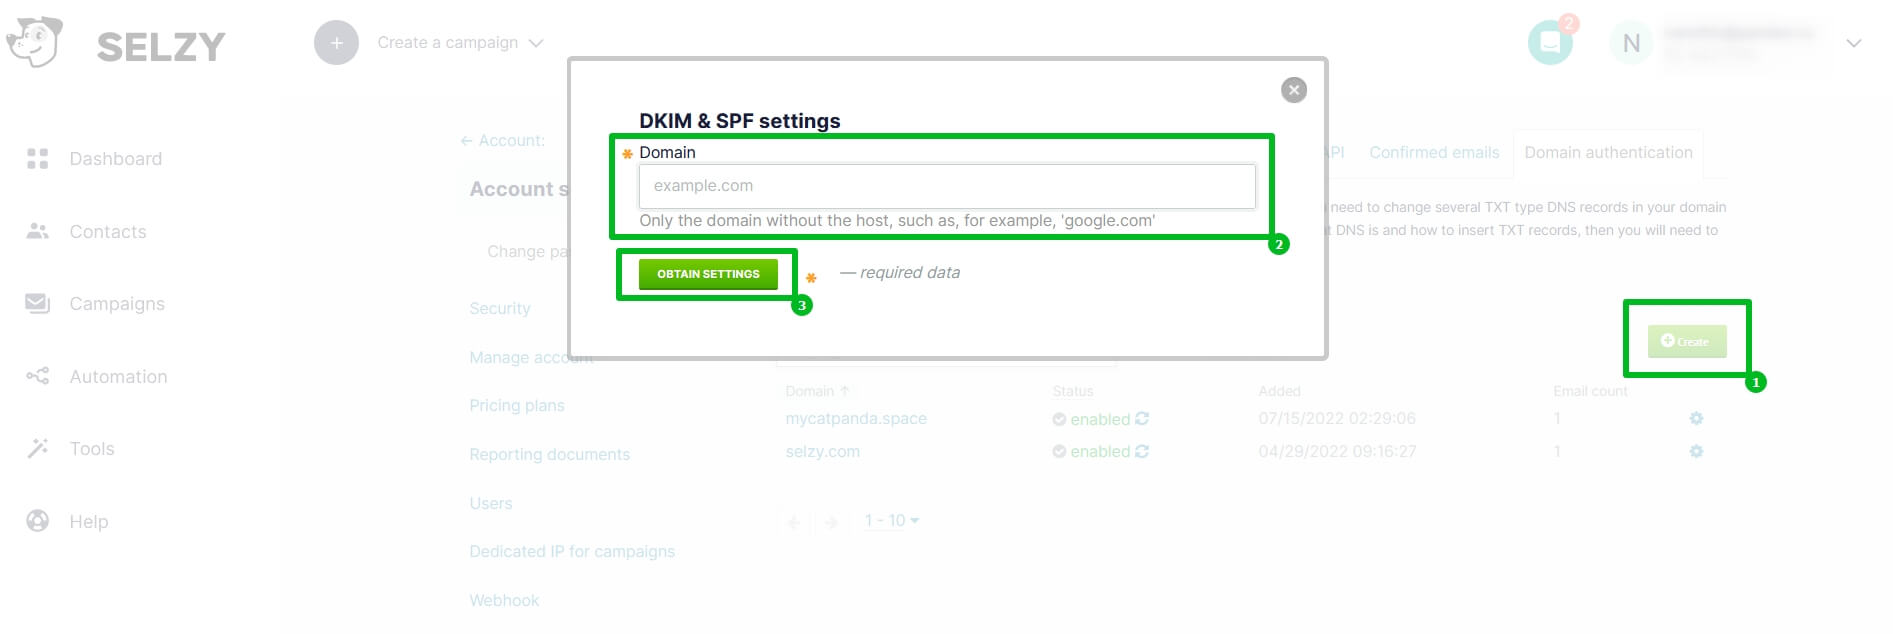 Adding the domain and getting settings for your email authentication.